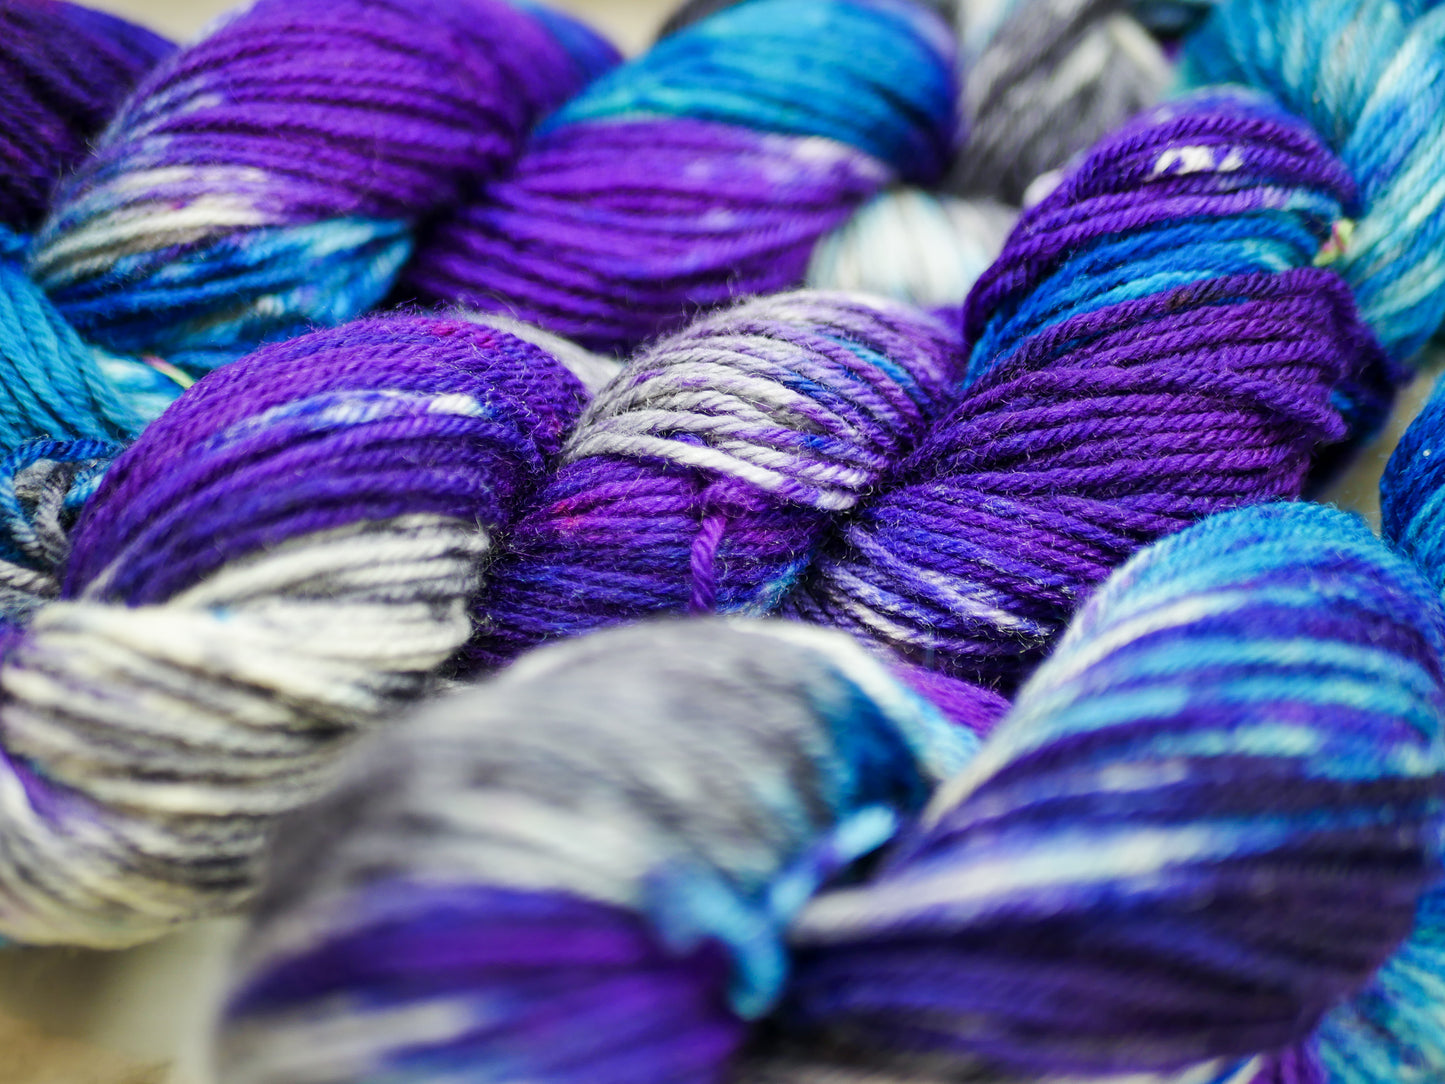 Handpainted 4 ply Worsted Weight Superwash Blue Faced Leicester yarn - Gadabout